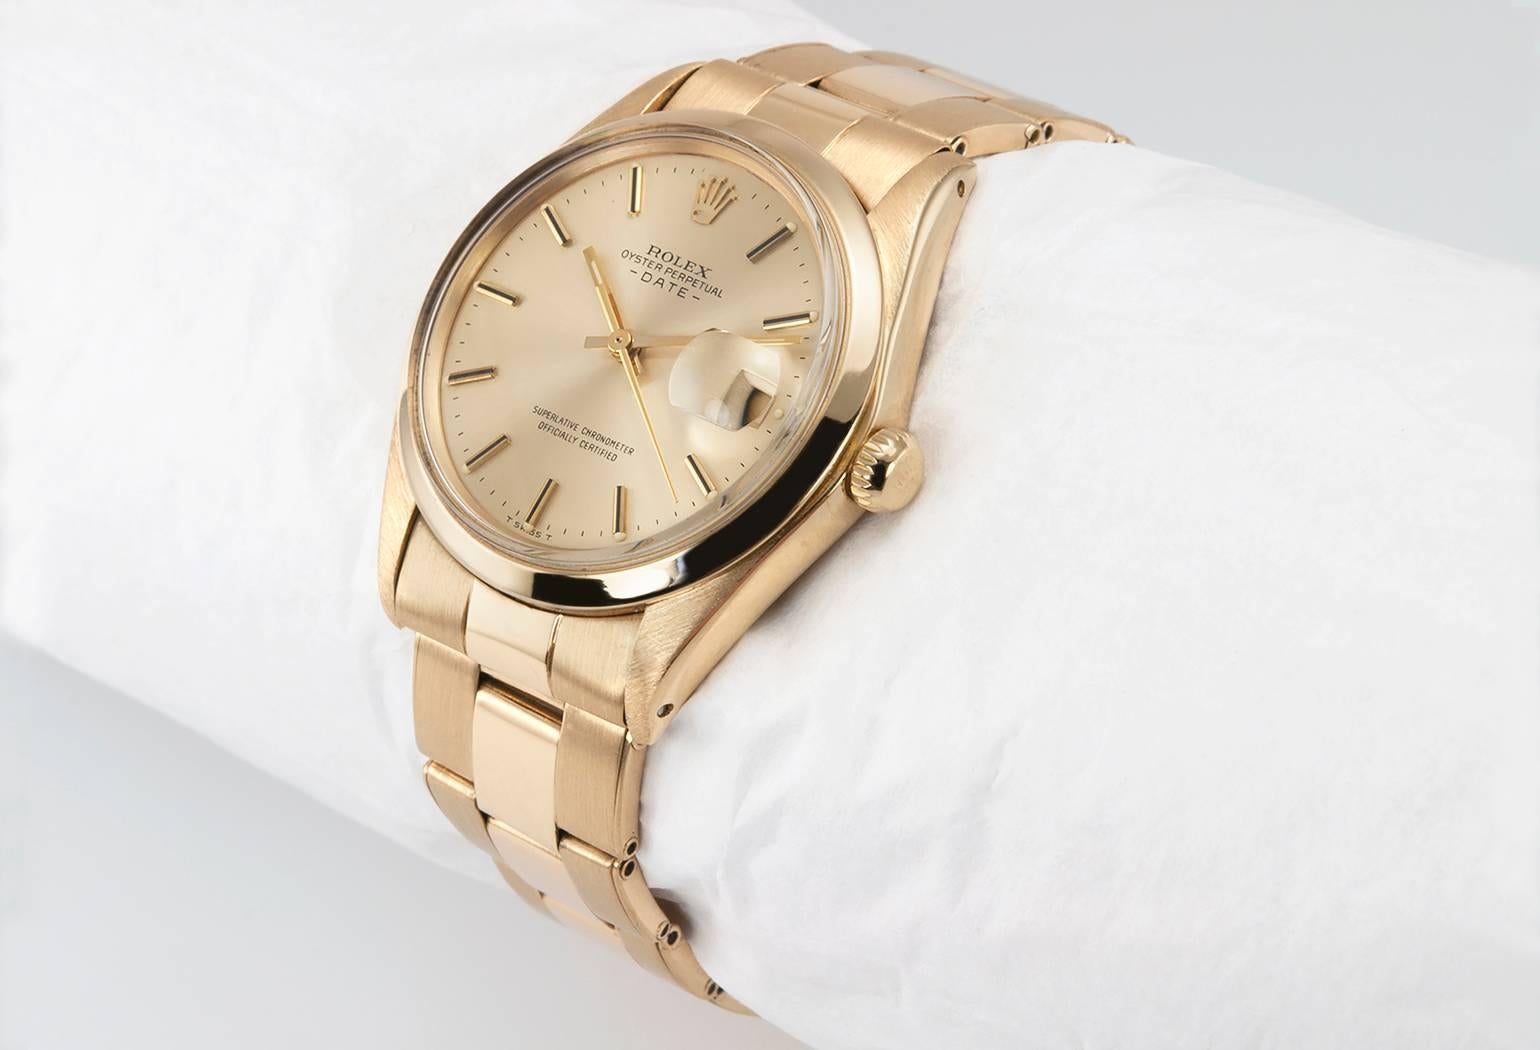 Rolex Date wristwatch in 18 karat yellow gold, reference 1500. This beautiful watch features an original gold color dial, gold locking crown, plastic crystal, with an automatic movement and an 18 karat riveted Oyster bracelet. Circa 1971. The watch